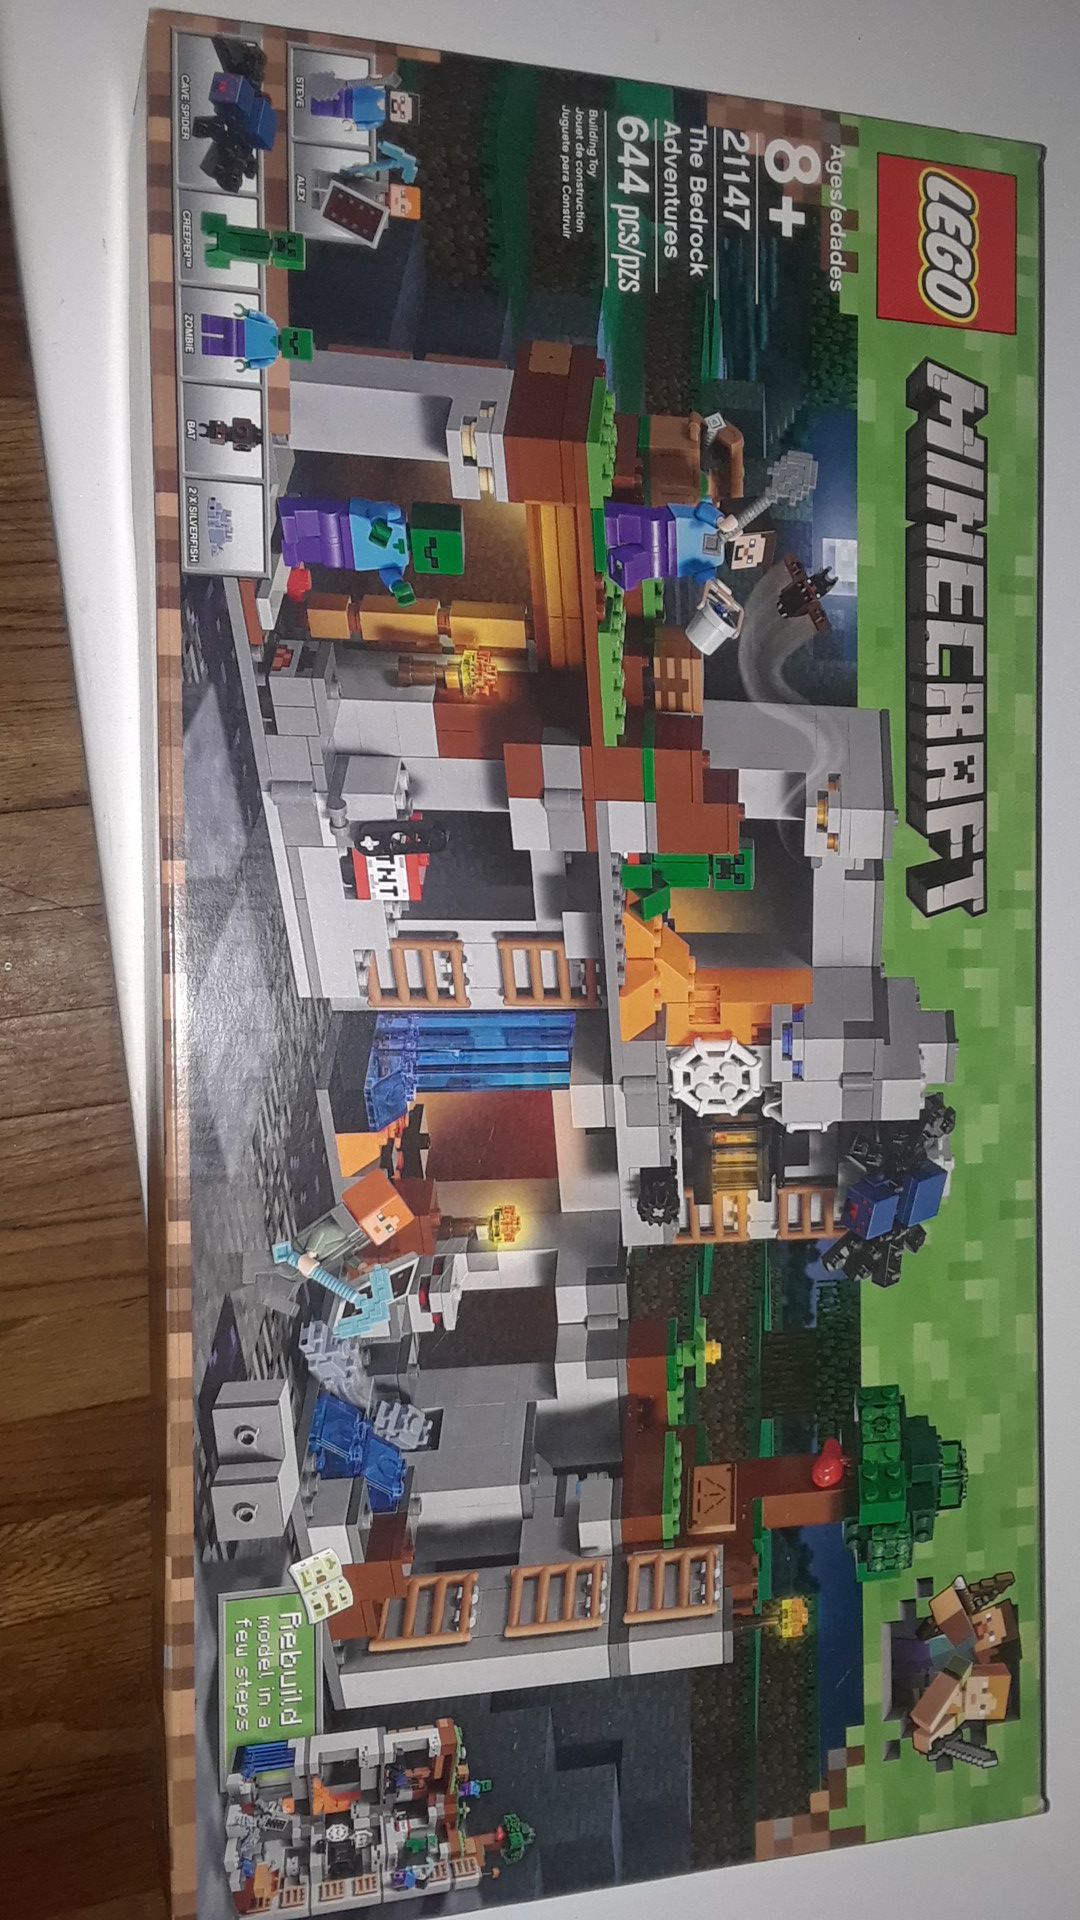 MINECRAFT The Bedrock Adventures #21147 for Sale in Seattle, WA - OfferUp